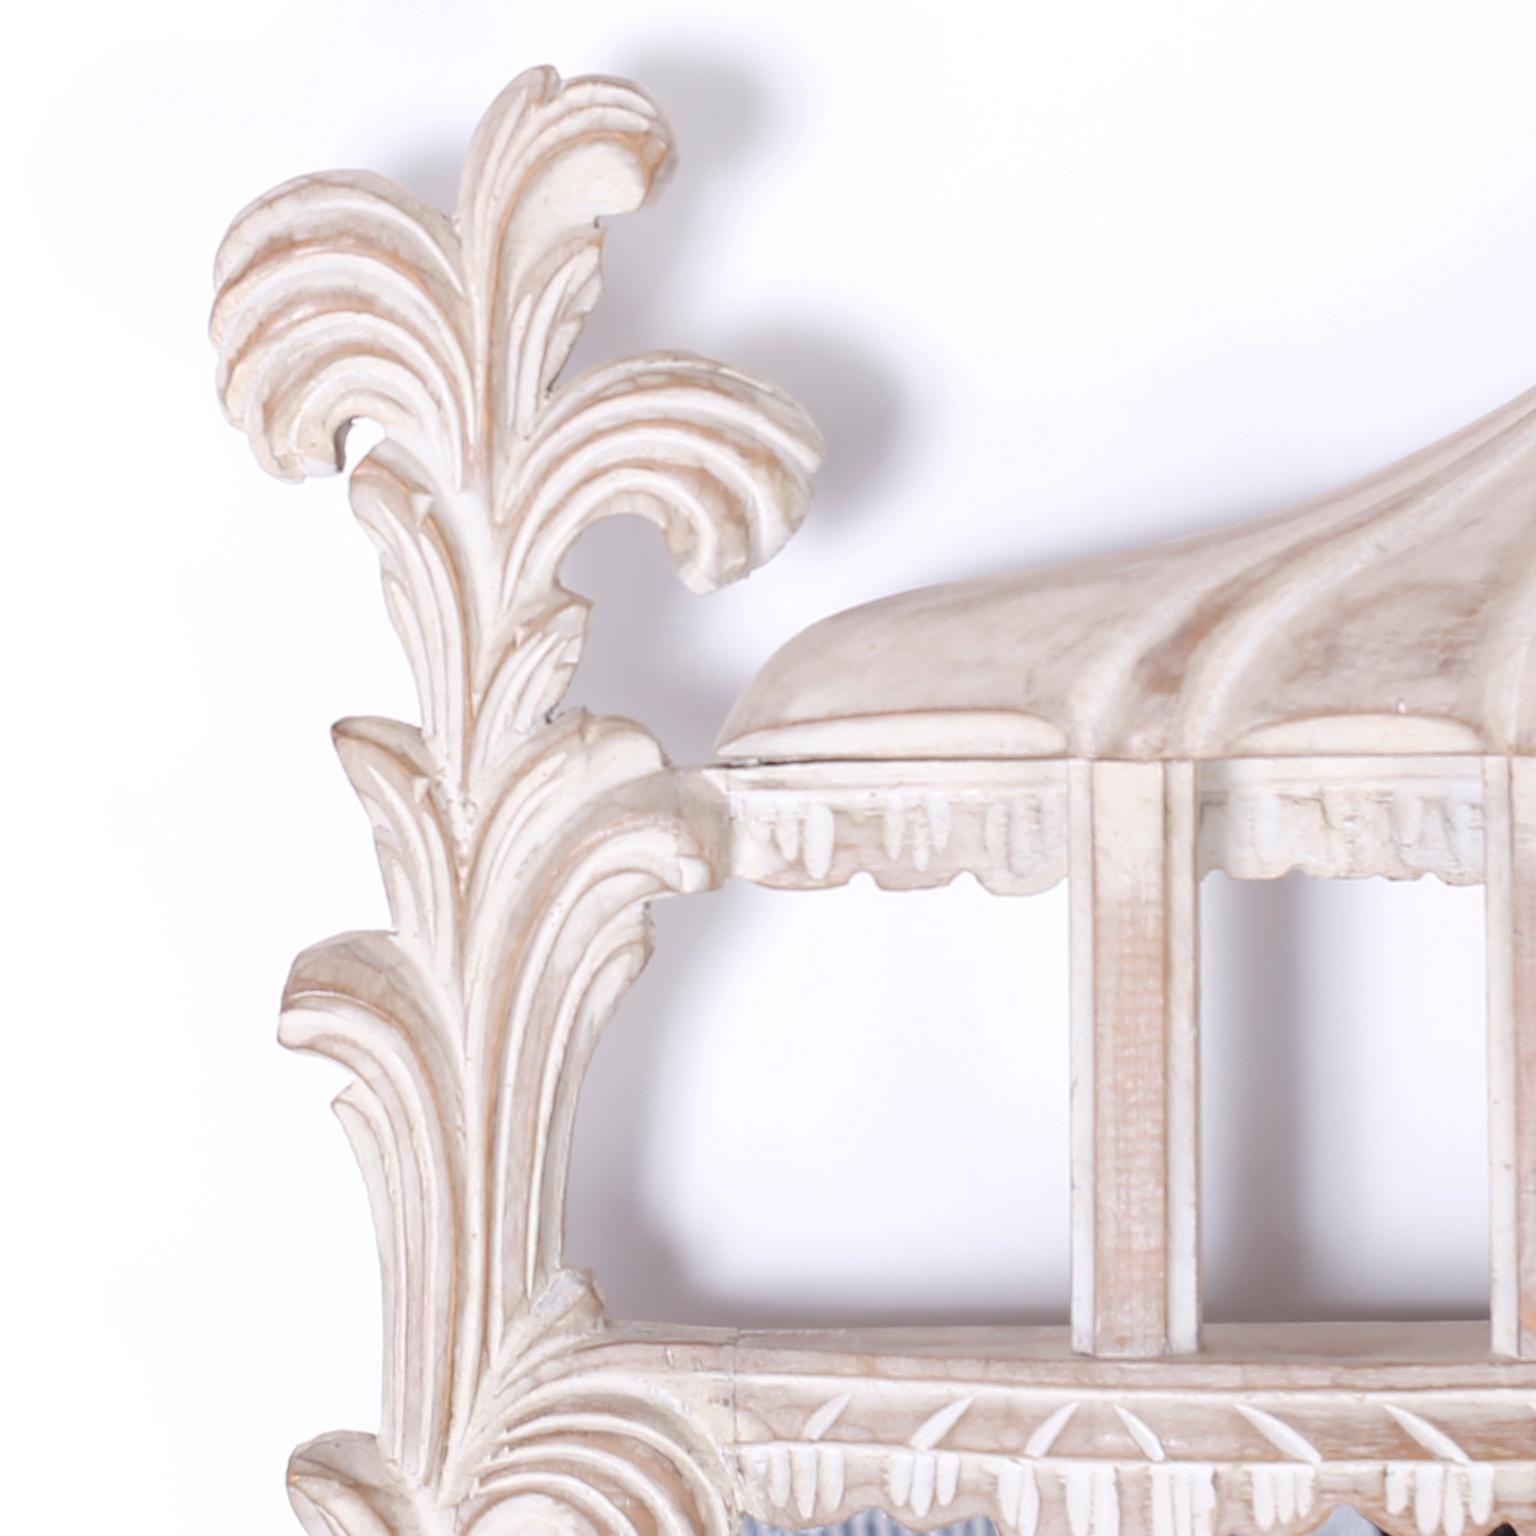 Vintage Italian carved wood wall mirror with a white washed or lime finish over a carved floral frame topped with plumes and a center crest with architectural elements.